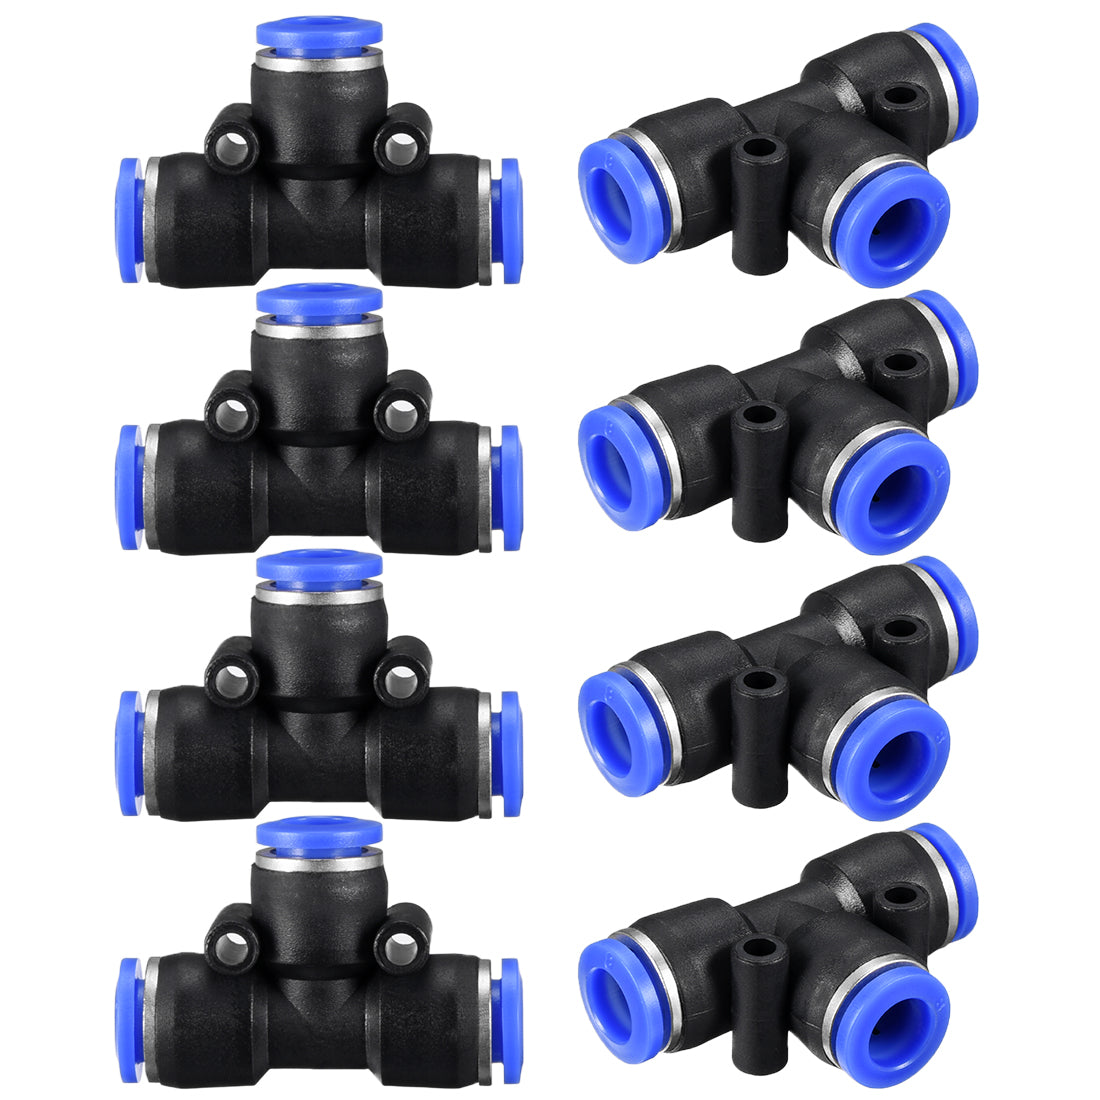 uxcell Uxcell 8pcs Push To Connect Fittings T Type Tube Connect 8mm or 5/16" od Push Fit Fittings Tube Fittings Push Lock Blue (8mm T tee)